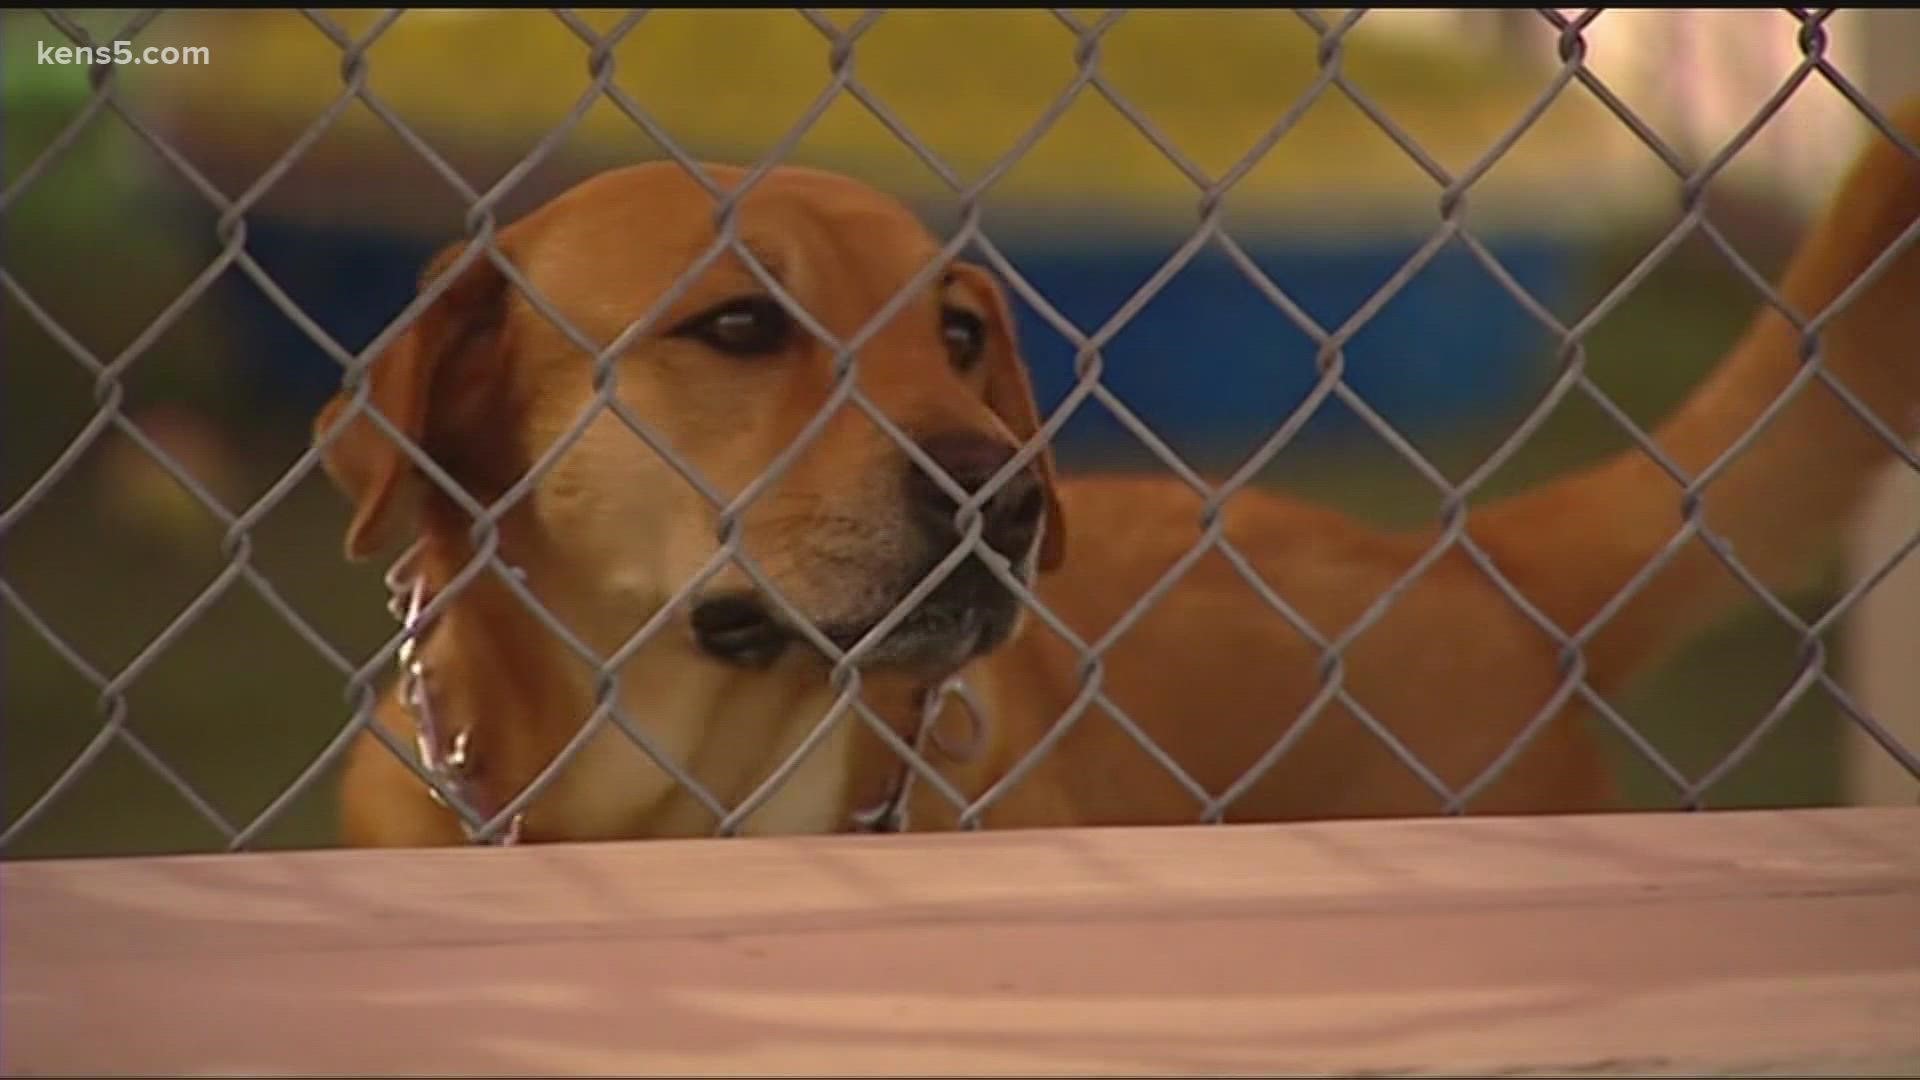 The Director of Government Relations for the Texas Humane Legislation Network says for years they’ve been pushing for stricter laws when it comes to pet shelter.